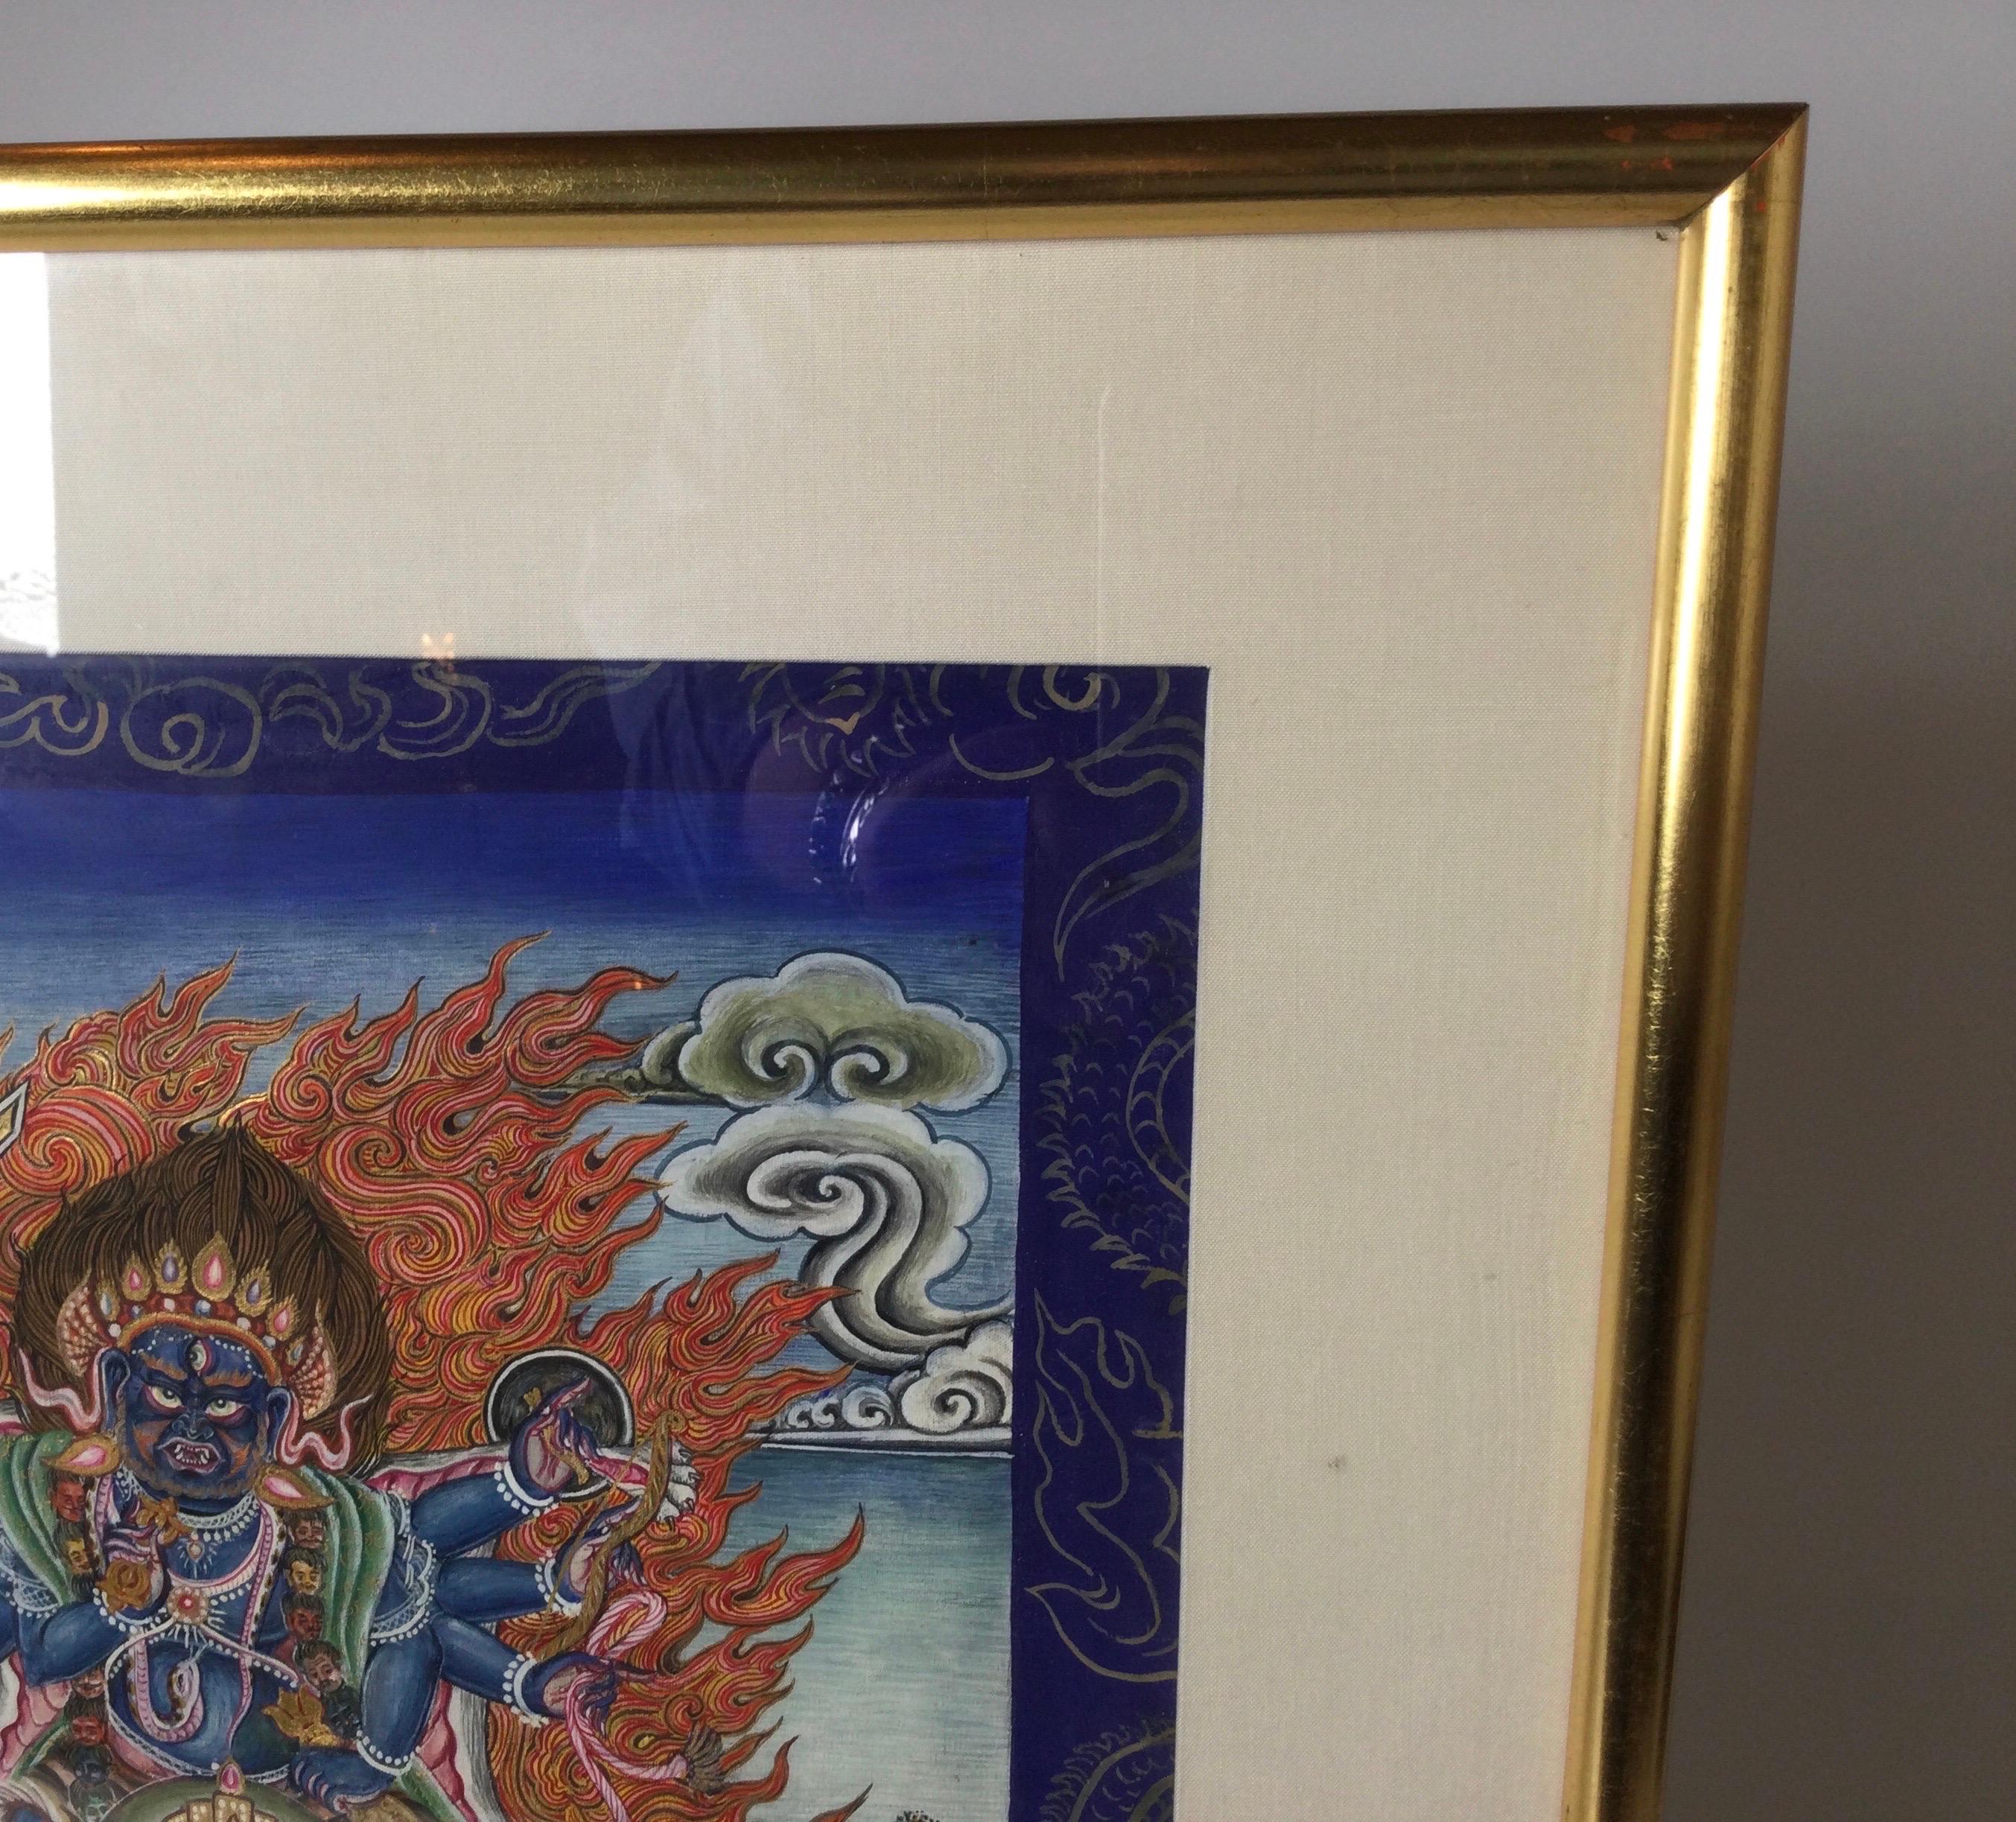 A pair of vibrantly colored Burmese water color paintings of Deities. The early 20th century paintings in mid 20th century professionally framed giltwood frames.